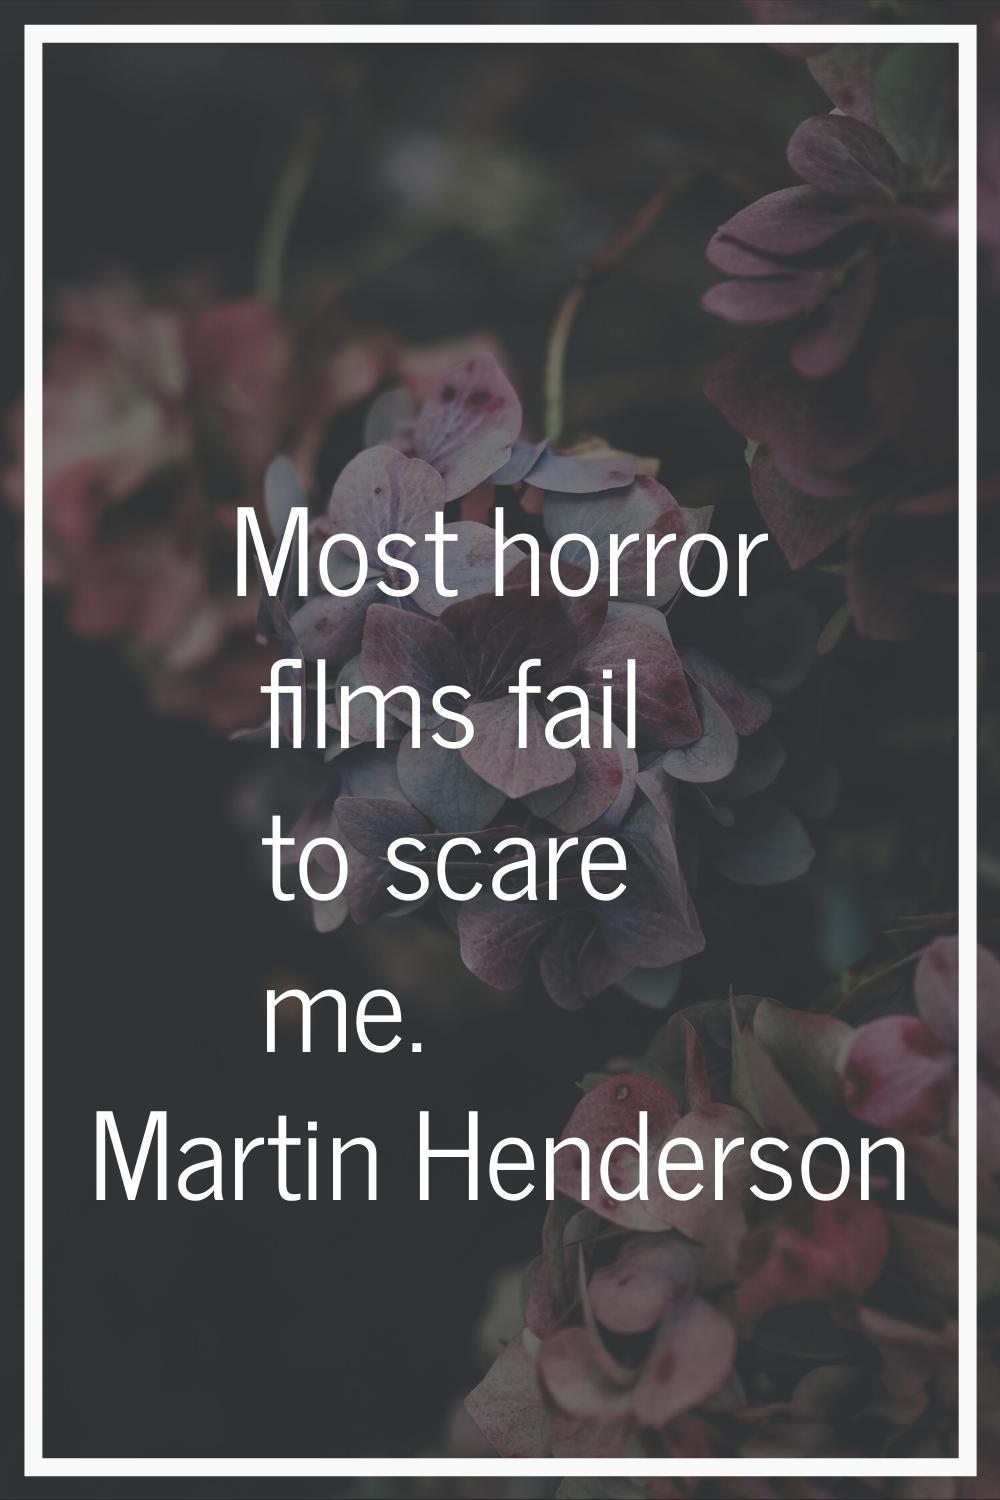 Most horror films fail to scare me.